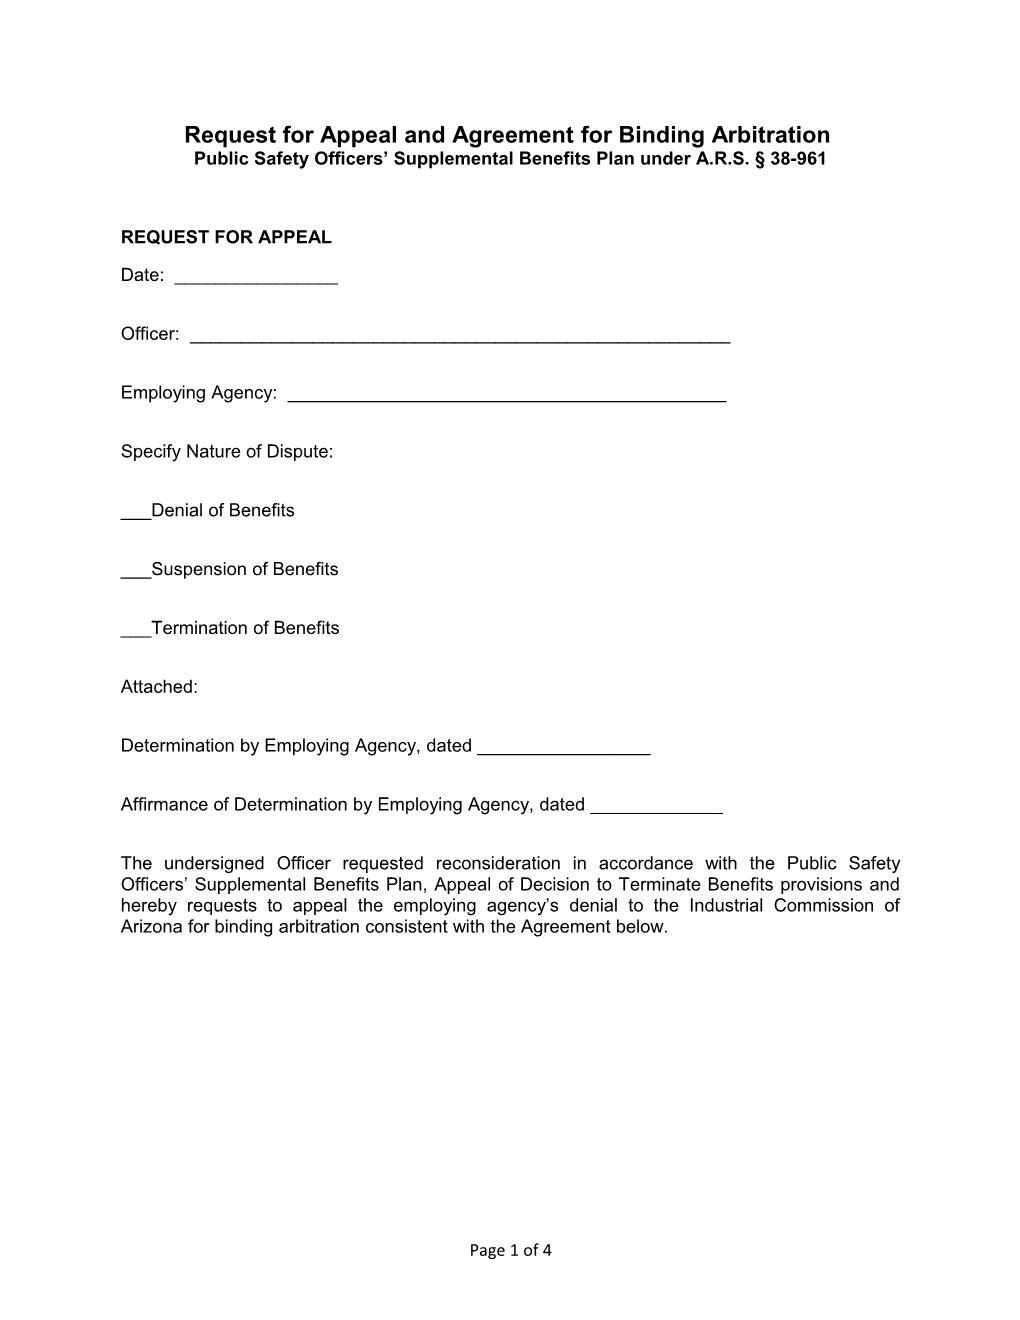 Request for Appeal and Agreement for Binding Arbitration